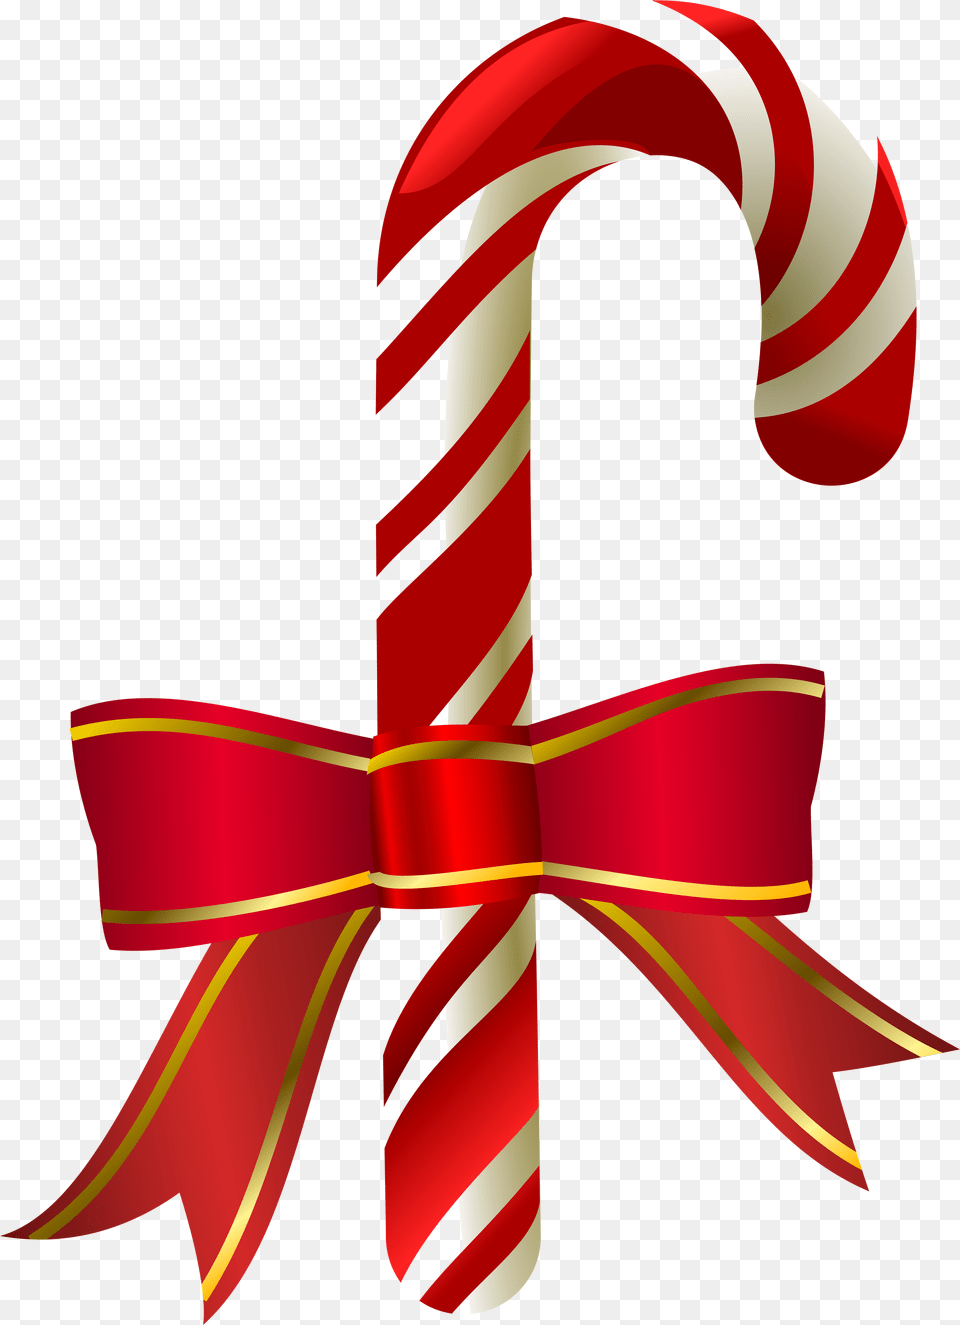 Candy Cane Collection Of Candycane Clipart Best Transparent Christmas Candy Cane, Food, Sweets, Dynamite, Weapon Free Png